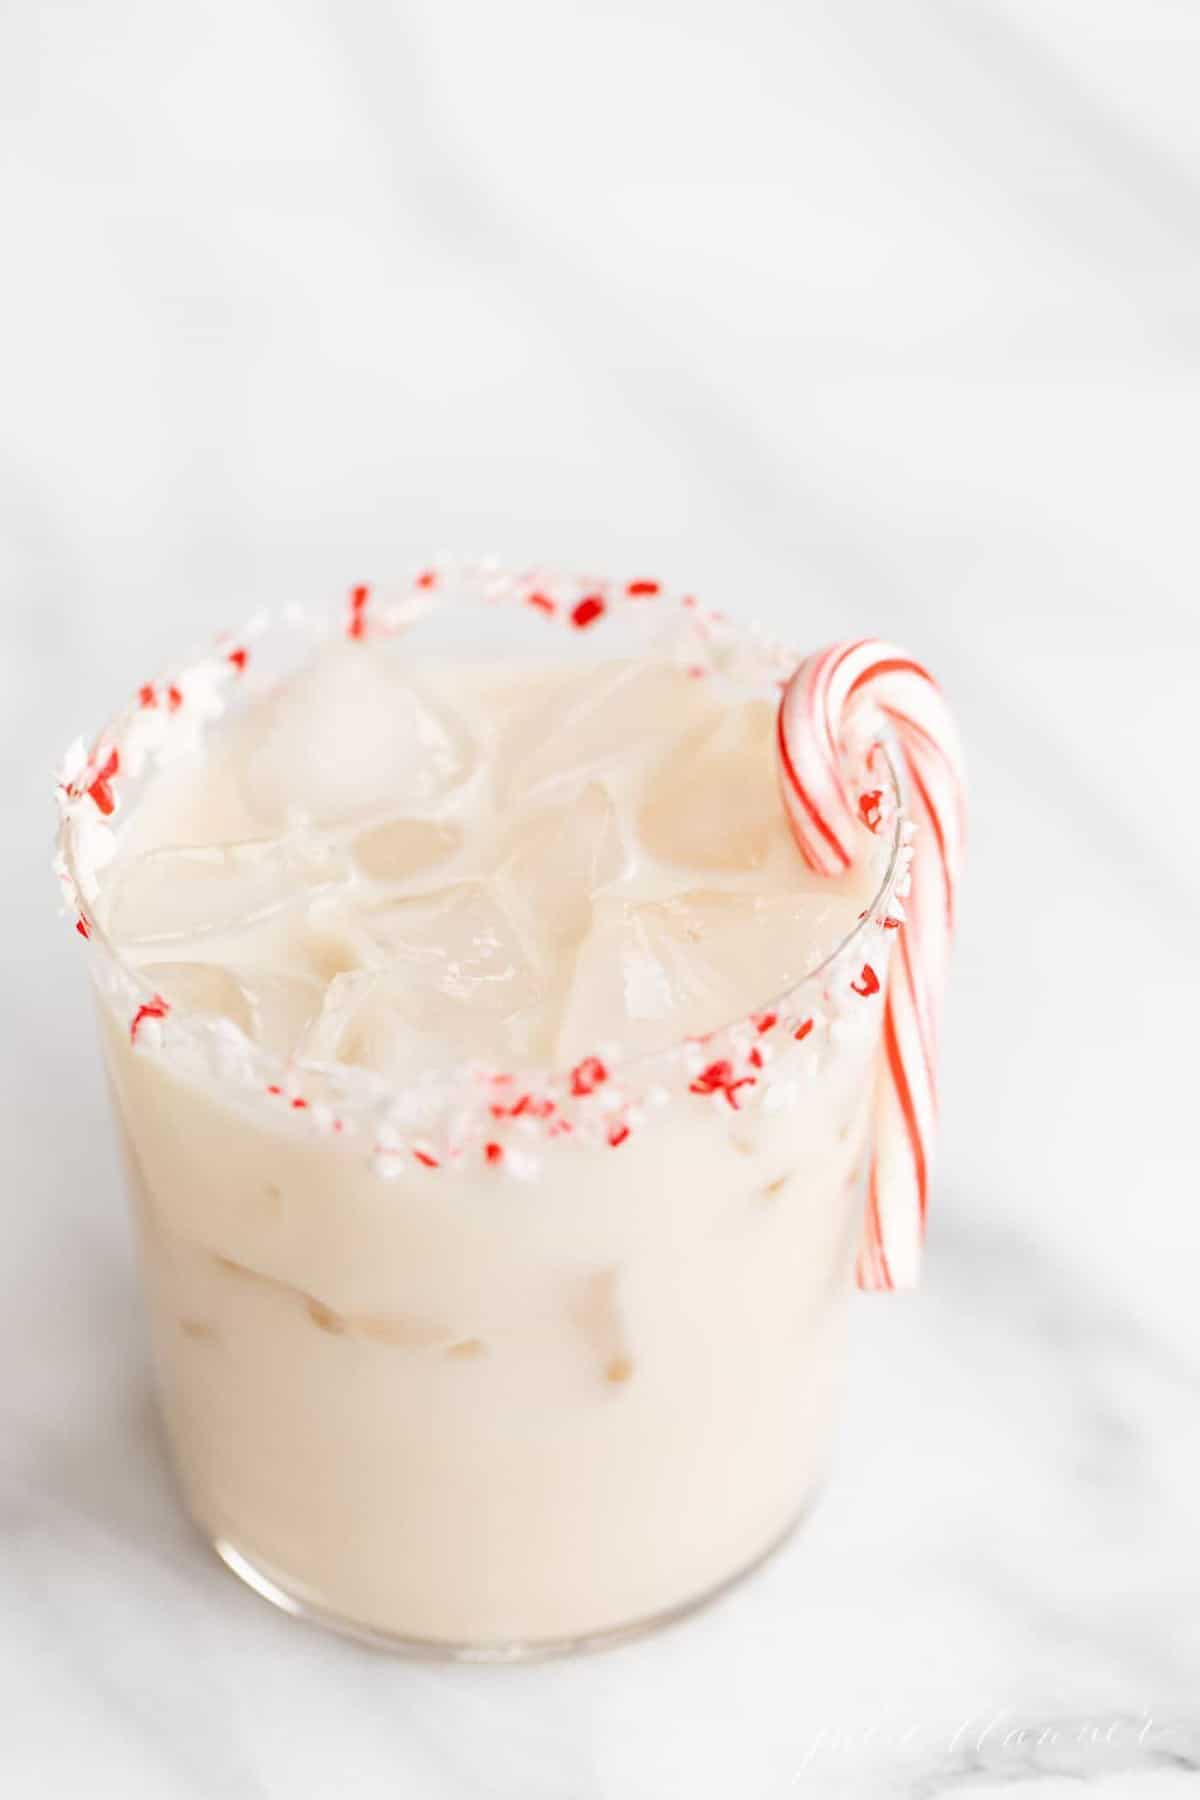 Marble surface with a peppermint white russian, candy cane garnish.